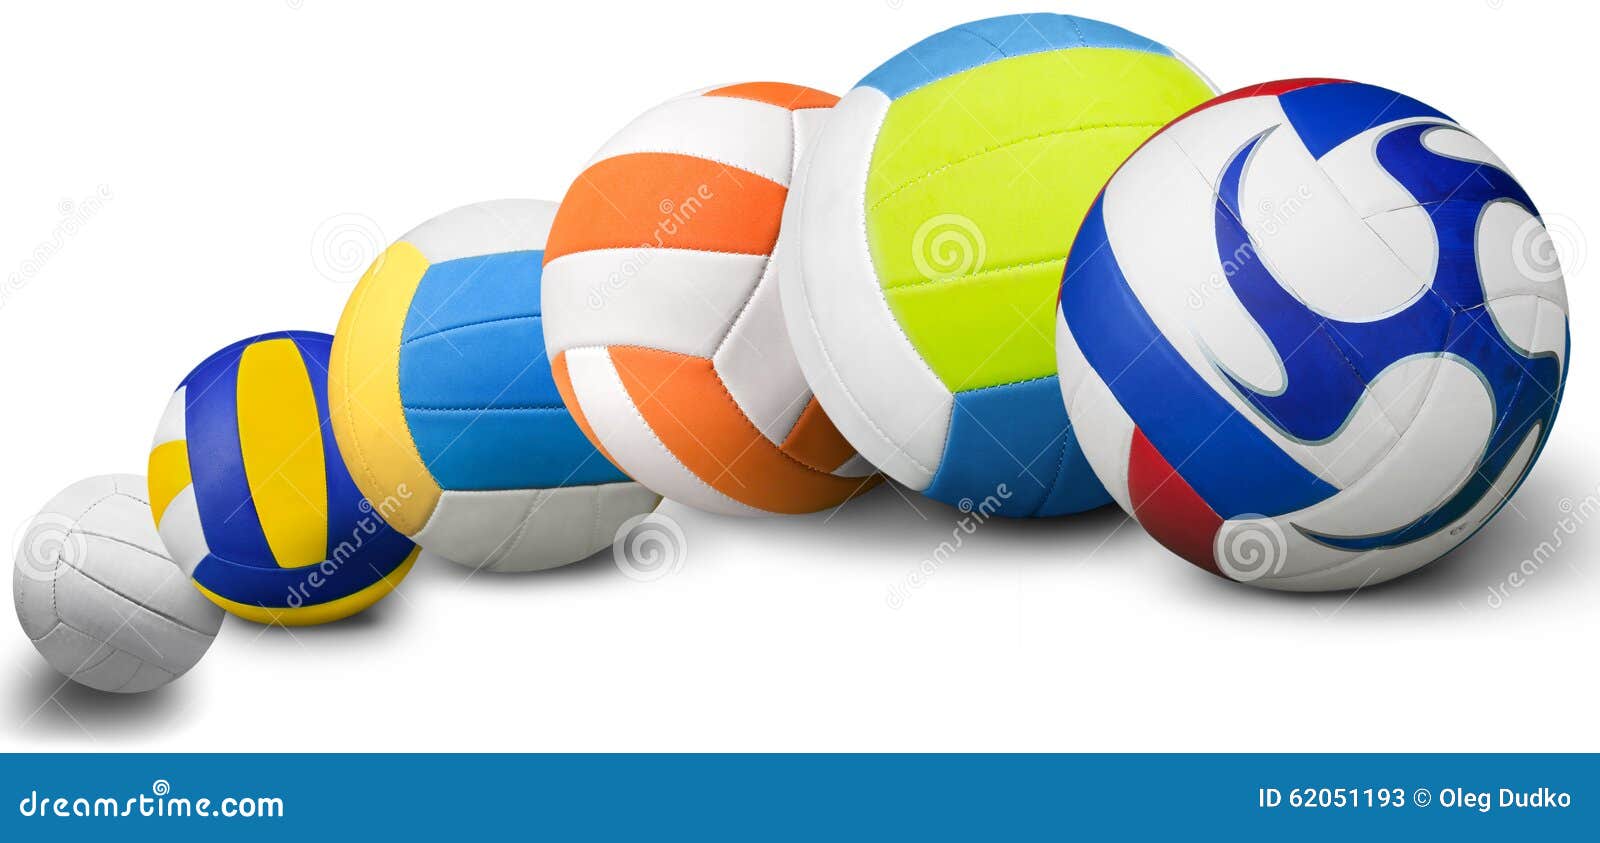 Volleyball stock image. Image of white, competition, activity - 62051193